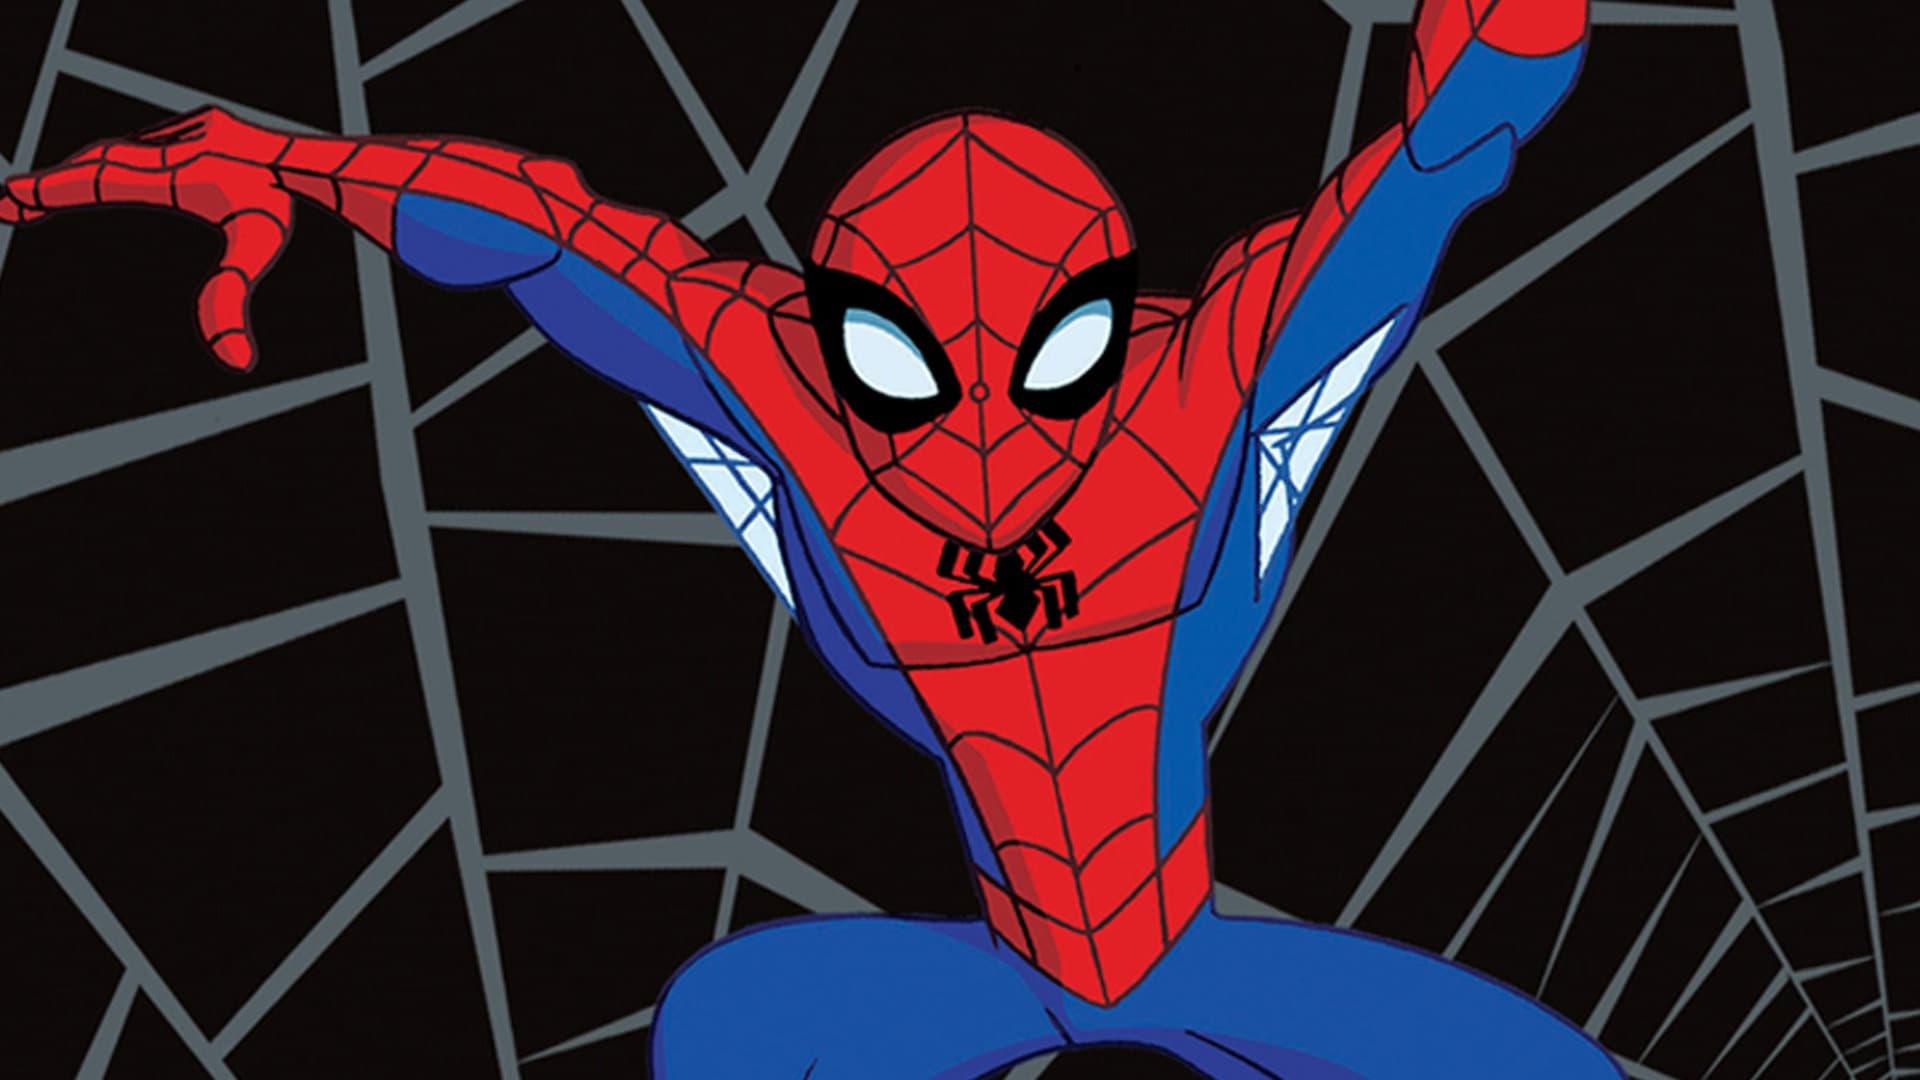 The Spectacular Spider-Man backdrop